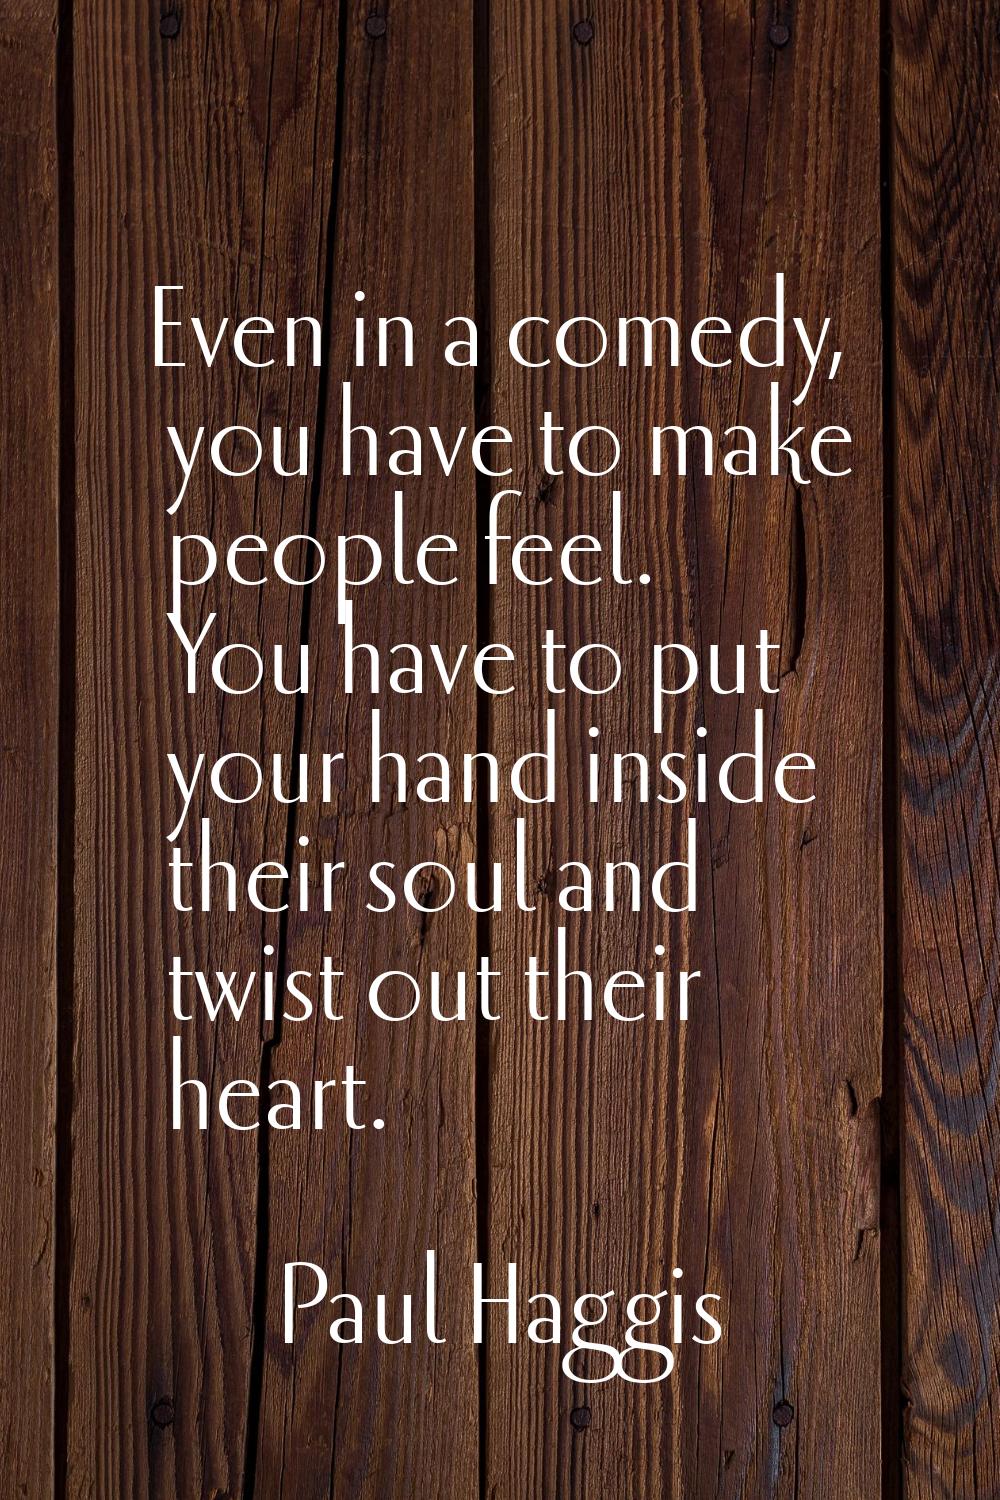 Even in a comedy, you have to make people feel. You have to put your hand inside their soul and twi